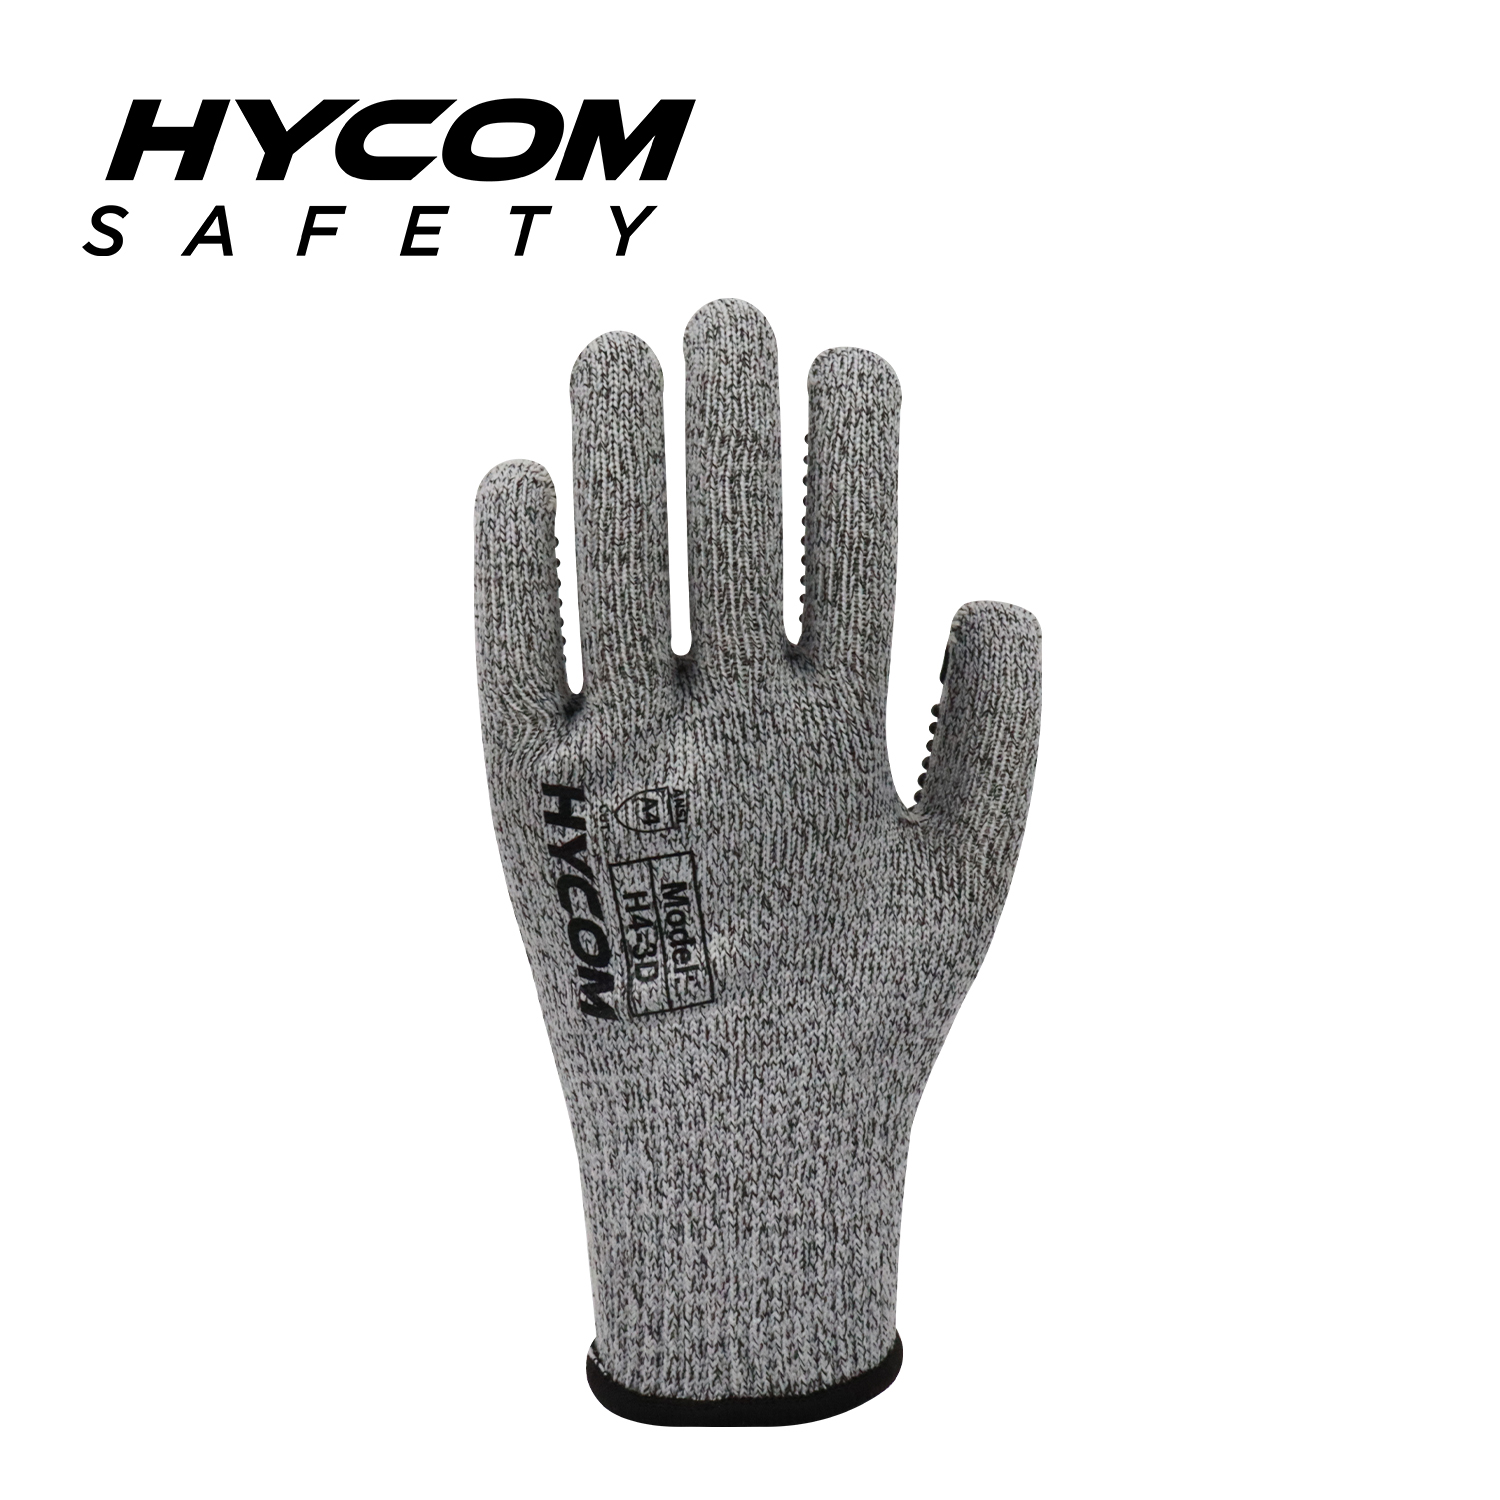 HYCOM 10G ANSI 4 cut resistant glove with PVC dots